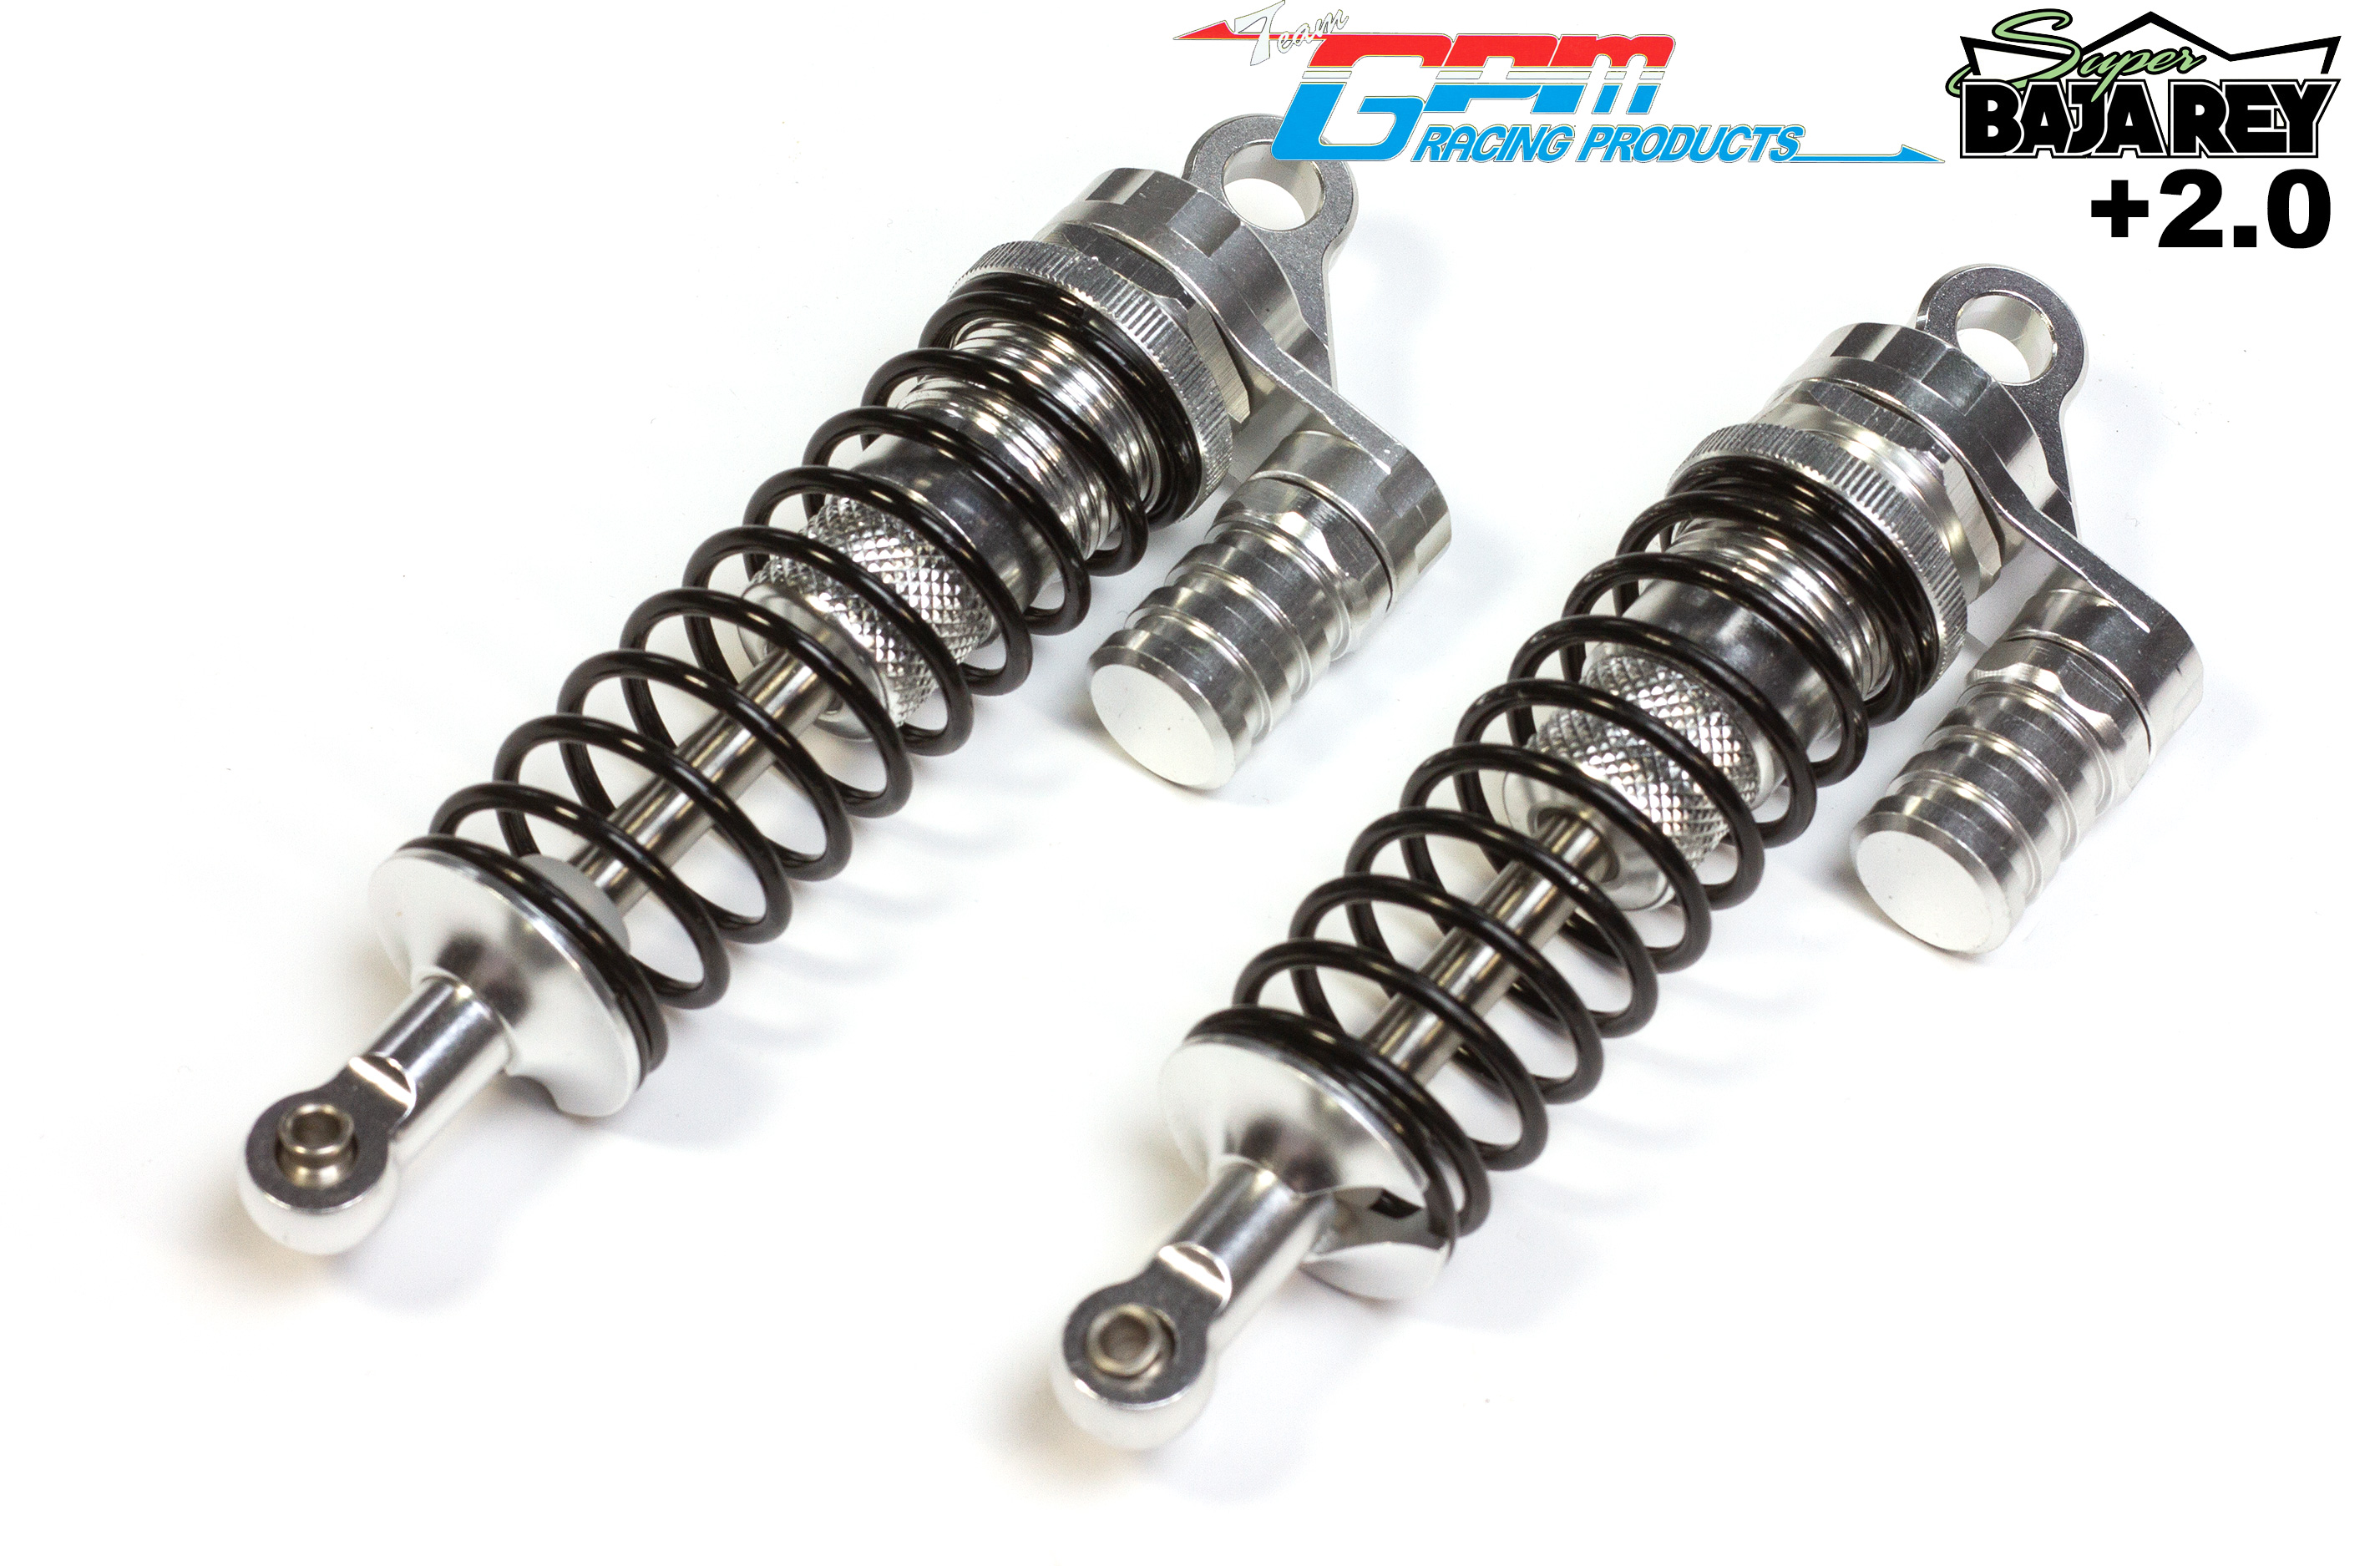 SB132F/L GPM Front Piggyback Shock absorbers for Super Baja Rey (incl. 2.0)